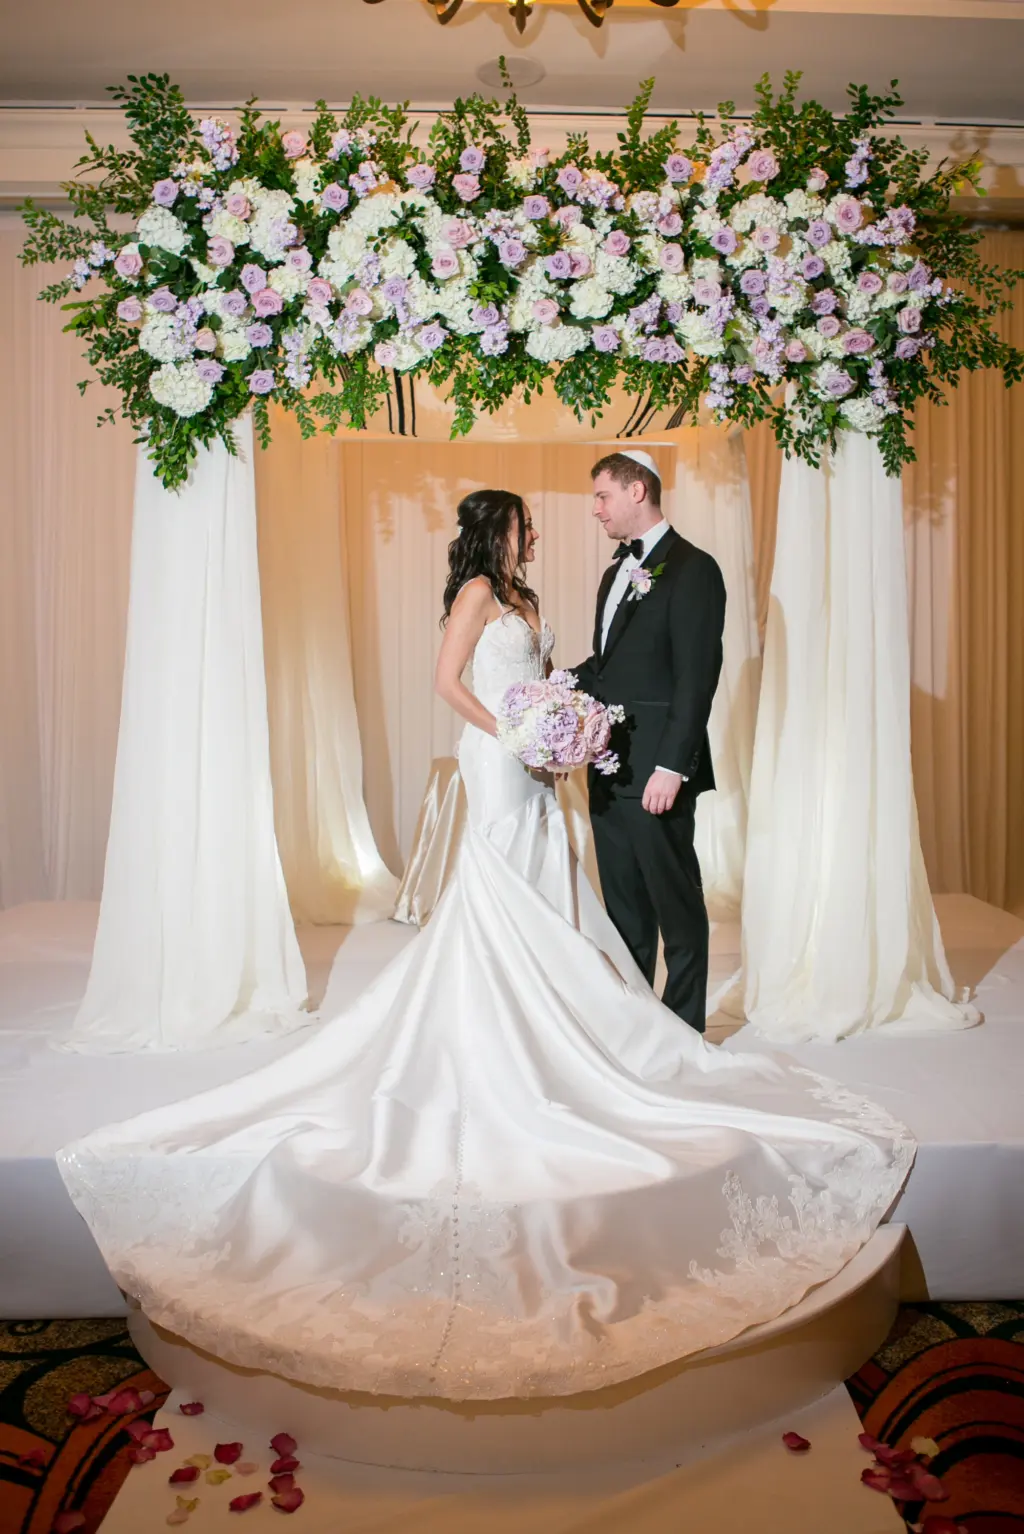 Bride and Groom Just Married Portrait | Elegant Jewish Black Tie Wedding Ceremony Chuppah with Drapery, Pink and Purple Roses, White Hydrangeas, and Greenery Inspiration | Tampa Bay Boutique Truly Forever Bridal | Photographer Carrie Wildes Photography